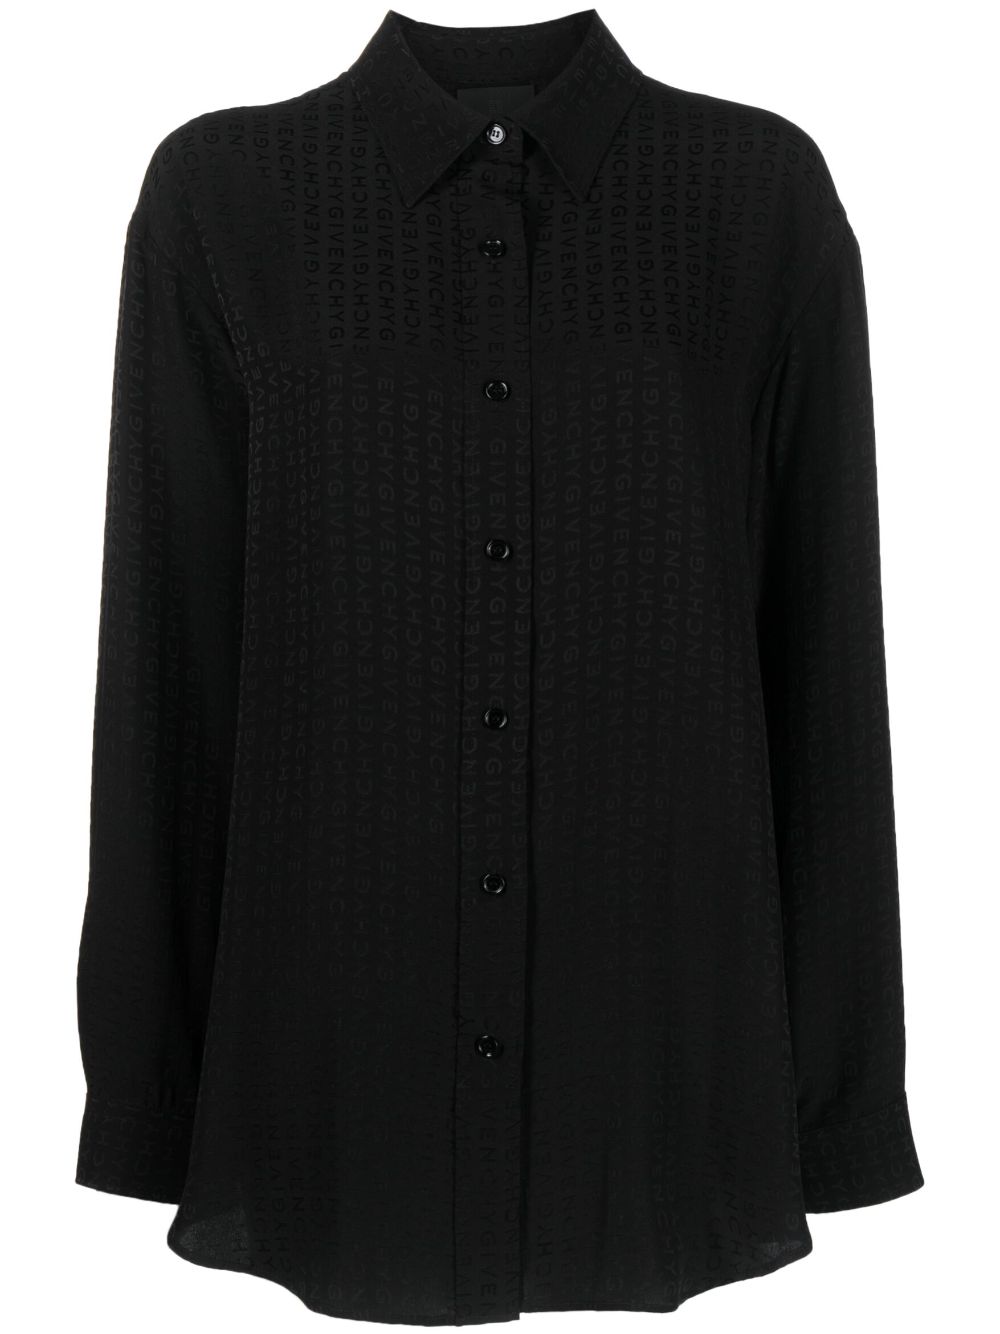 GIVENCHY Black Oversized Silk Shirt with Allover Logo Print for Women